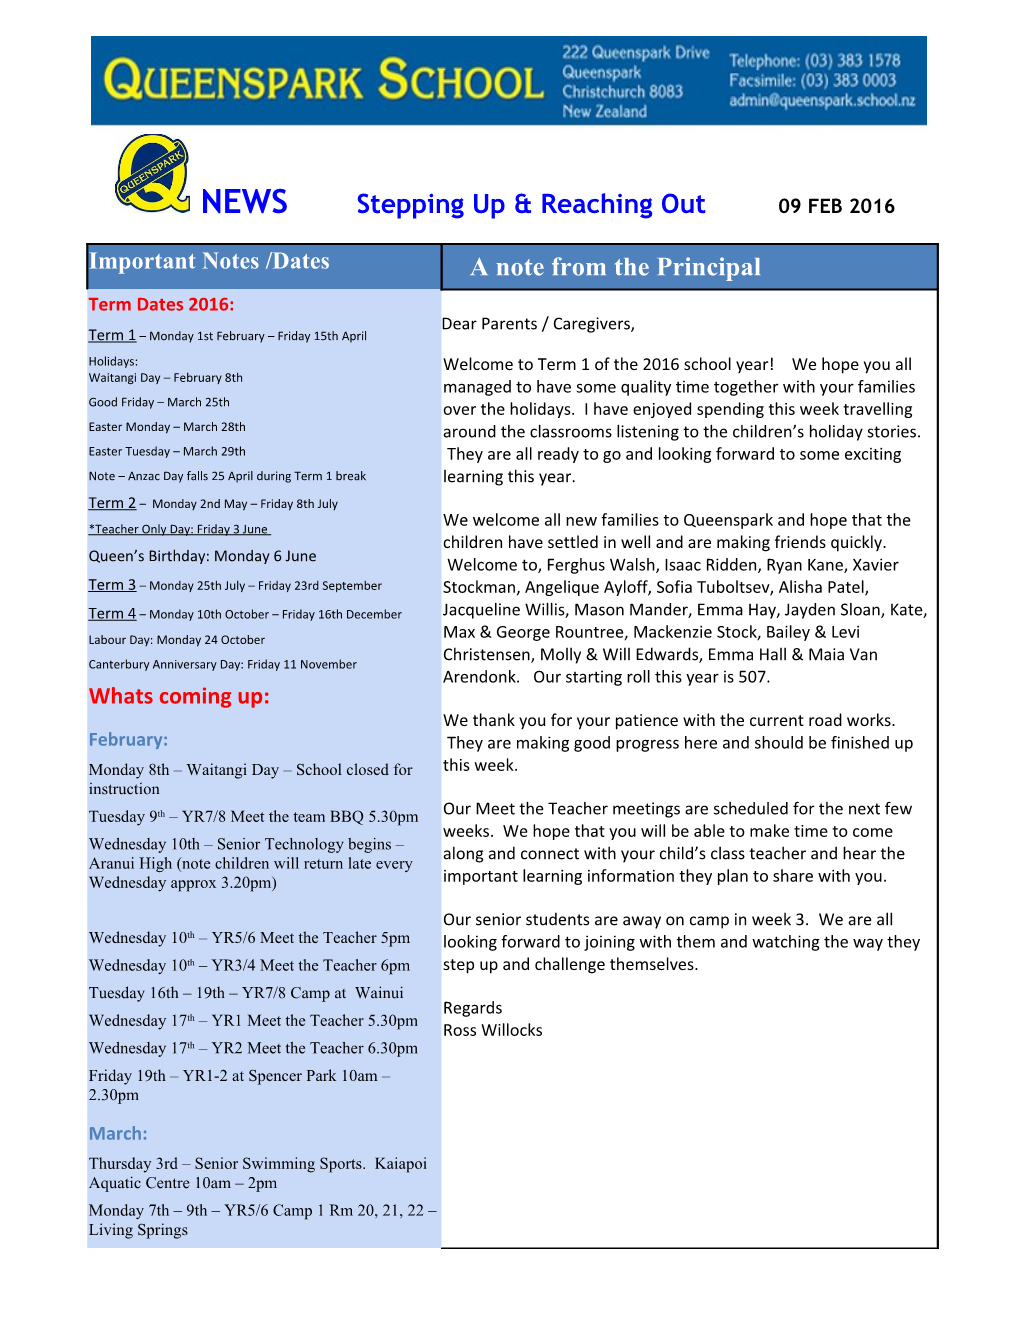 NEWS Stepping up & Reaching out 09 FEB 2016